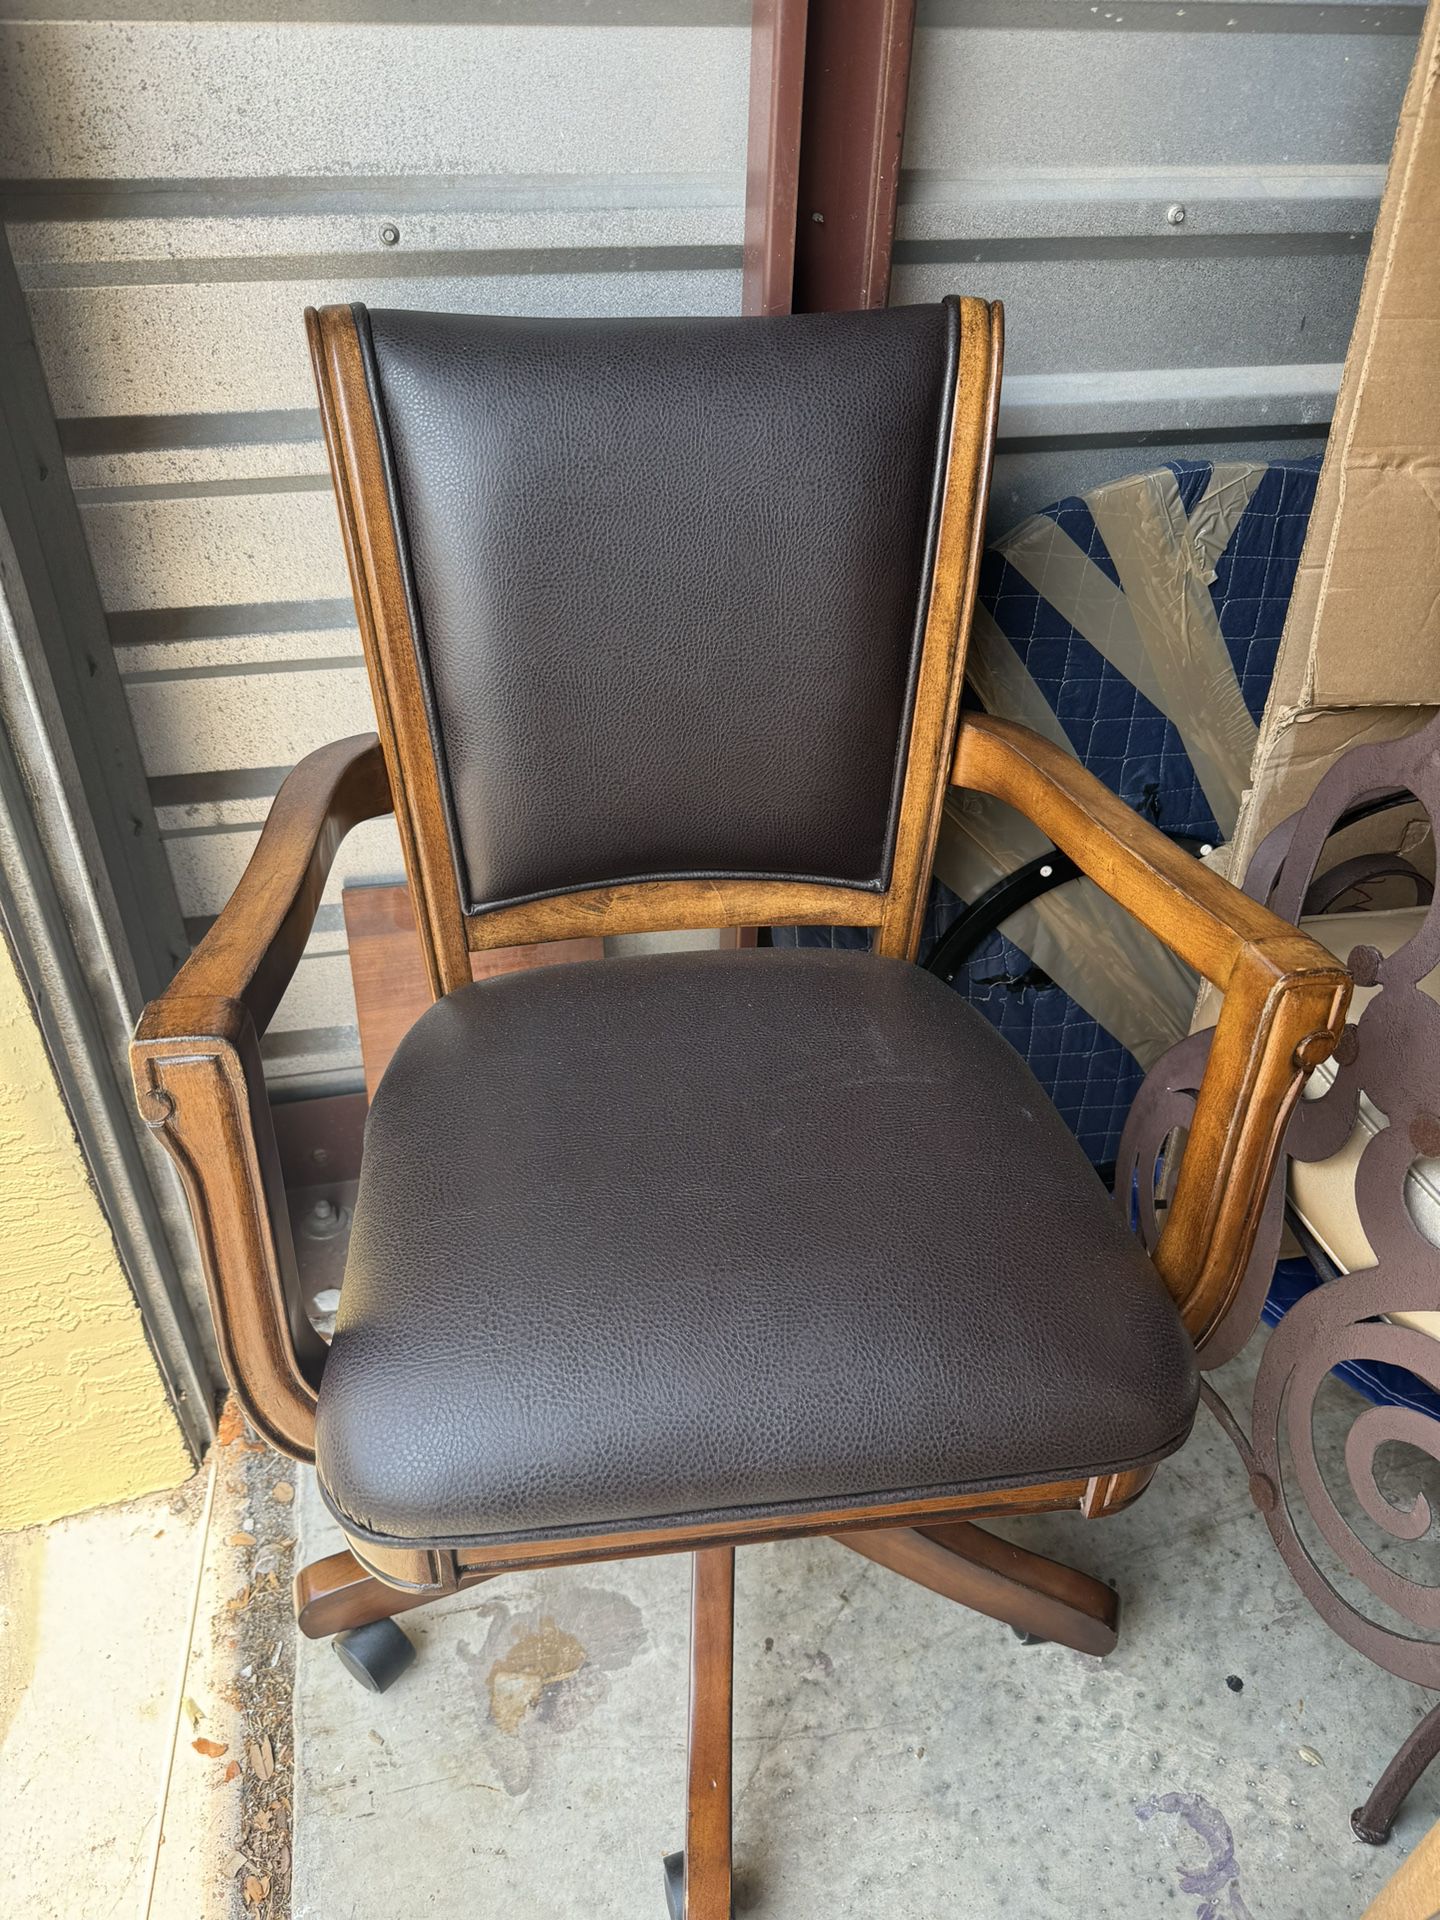 Beautiful Leather Office Chair - $40